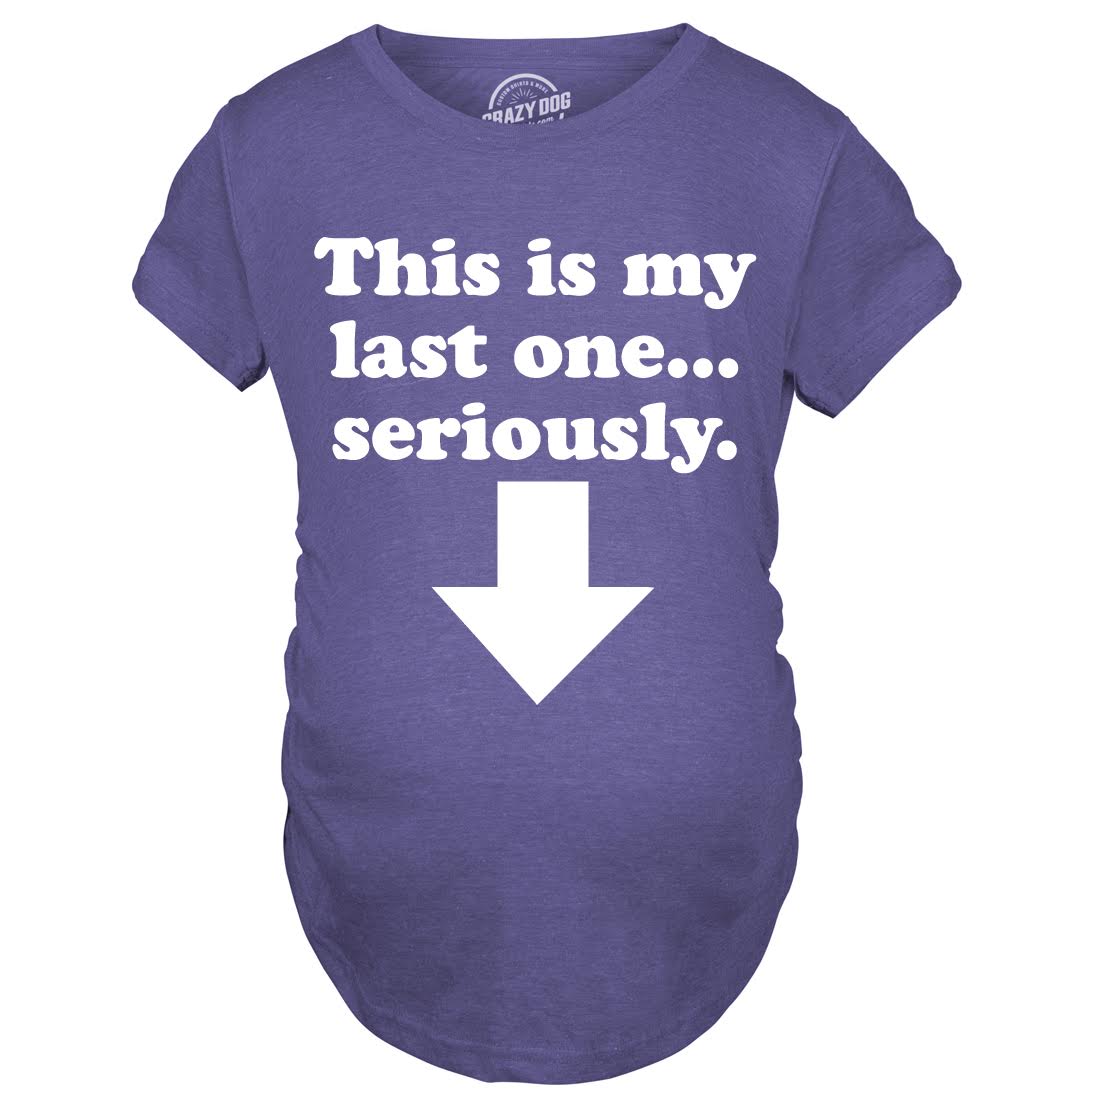 Funny Heather Purple This Is My Last One Seriously Maternity T Shirt Nerdy Sarcastic Tee